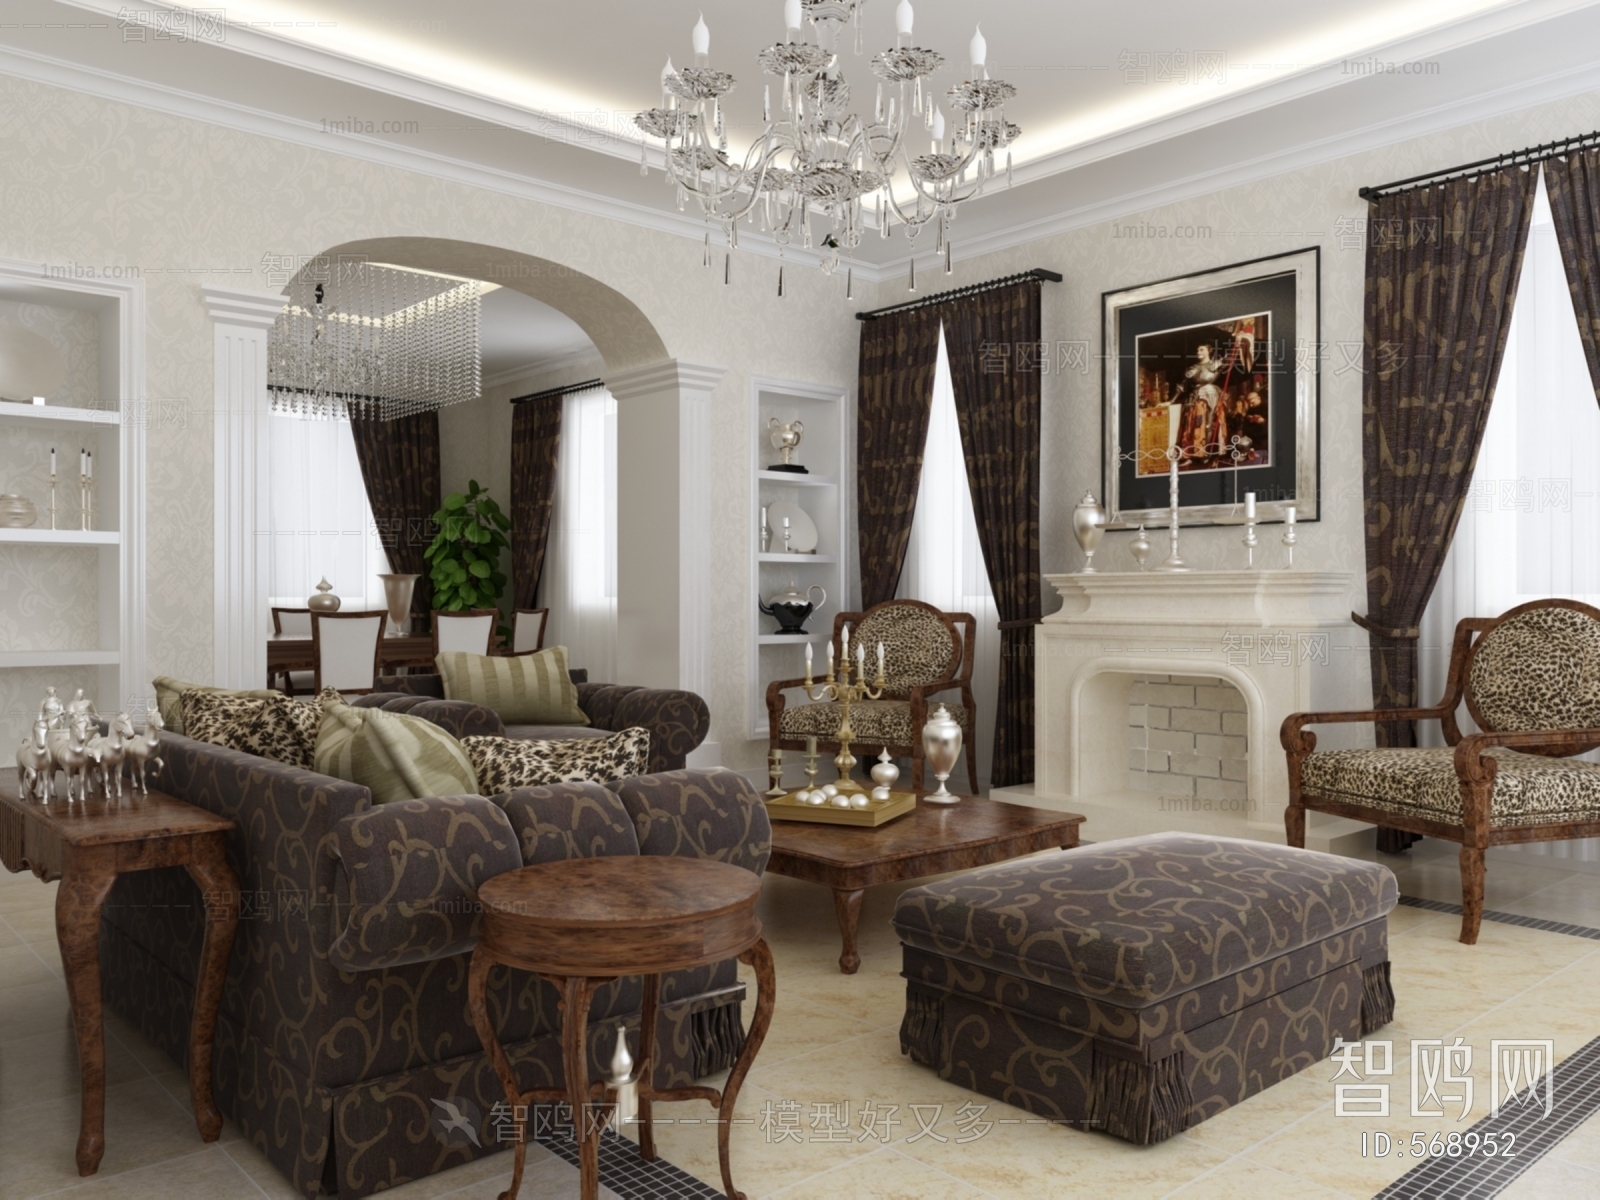 Classical Style A Living Room